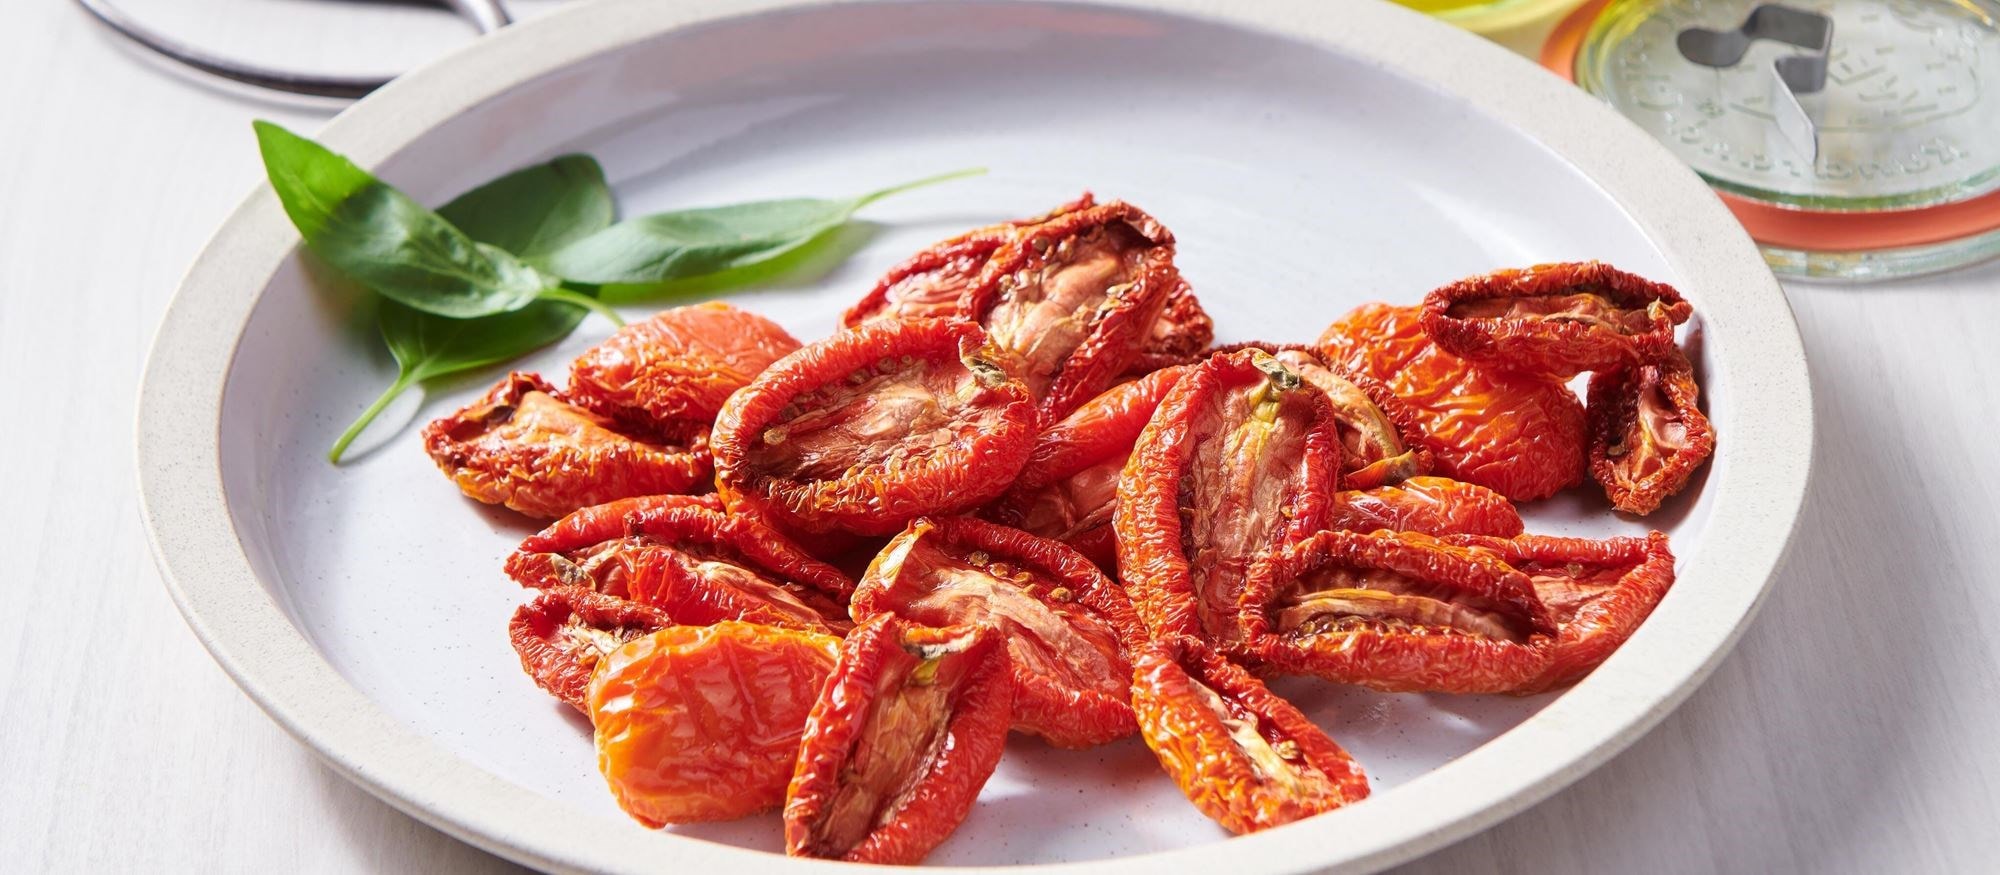 Easy and delicious Oven Sun Dried Tomatoes recipe using the Dehydrate Mode setting of your Wolf Oven